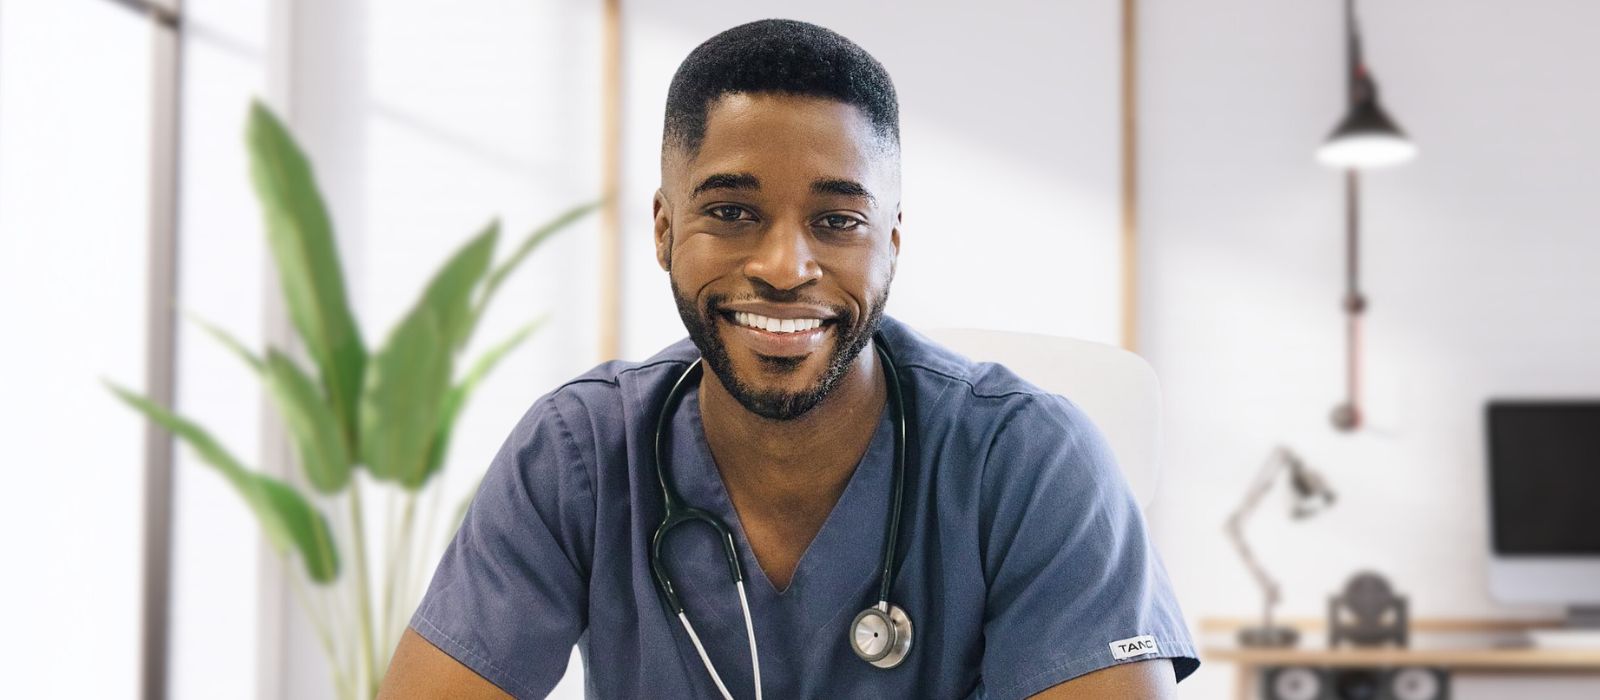 South Africa’s Actor-Model-Physician lights up the runway